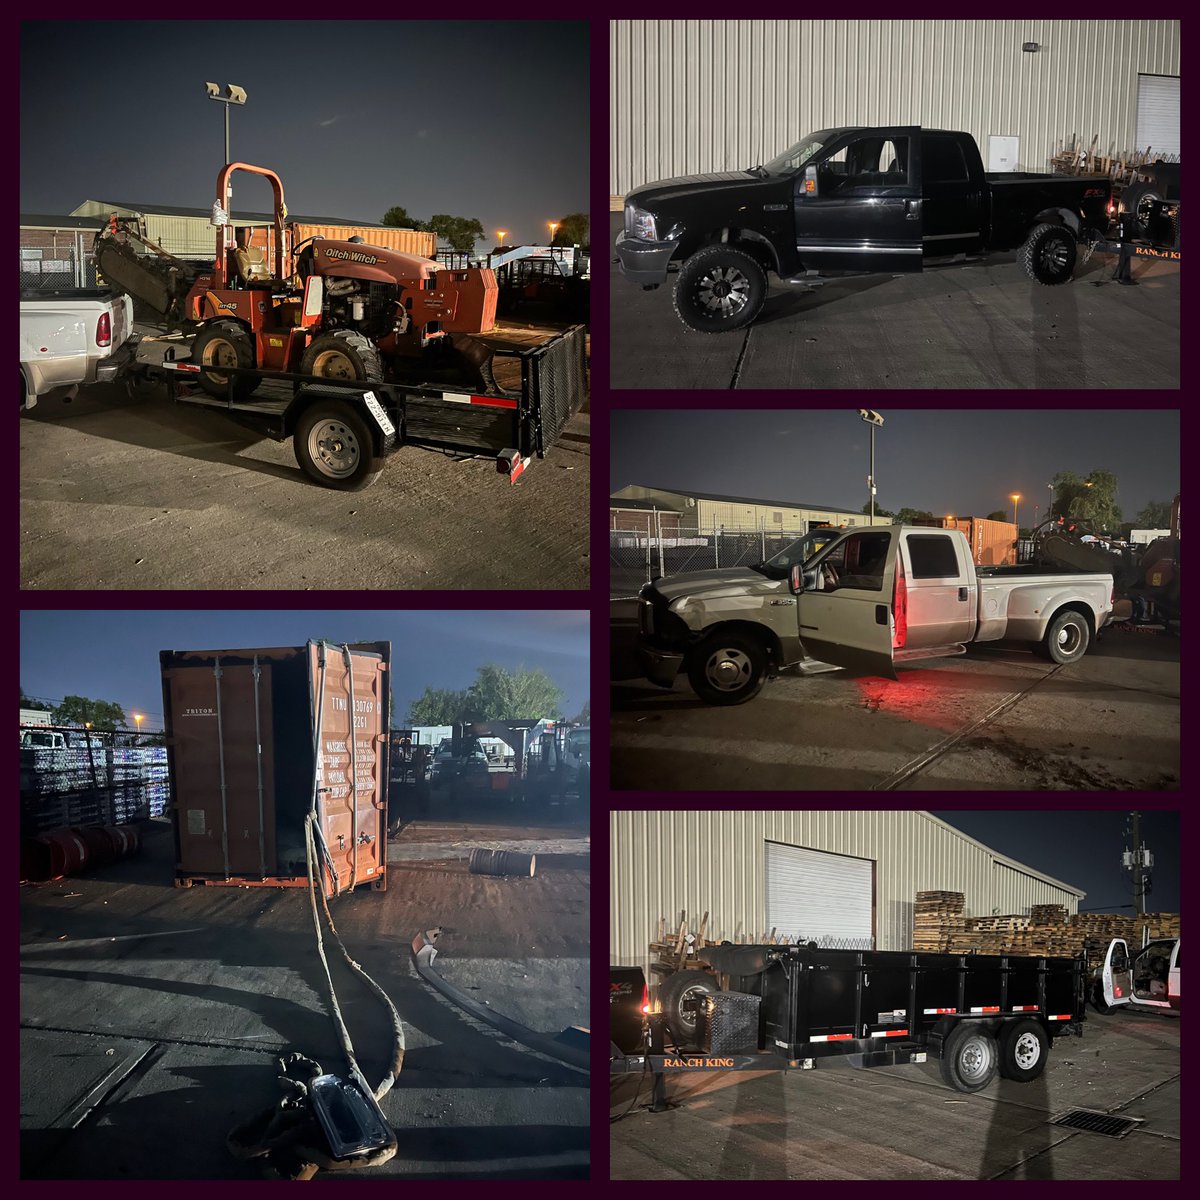 While we slept, @HCSOTexas deputies @HCSO_SID Auto-Theft Investigators were hard at work. Deputies detained two suspects who attempted to hook-up trailers w heavy-duty equipment and steal it from a business in NW Harris County. Each suspect was operating stolen dually
1/3